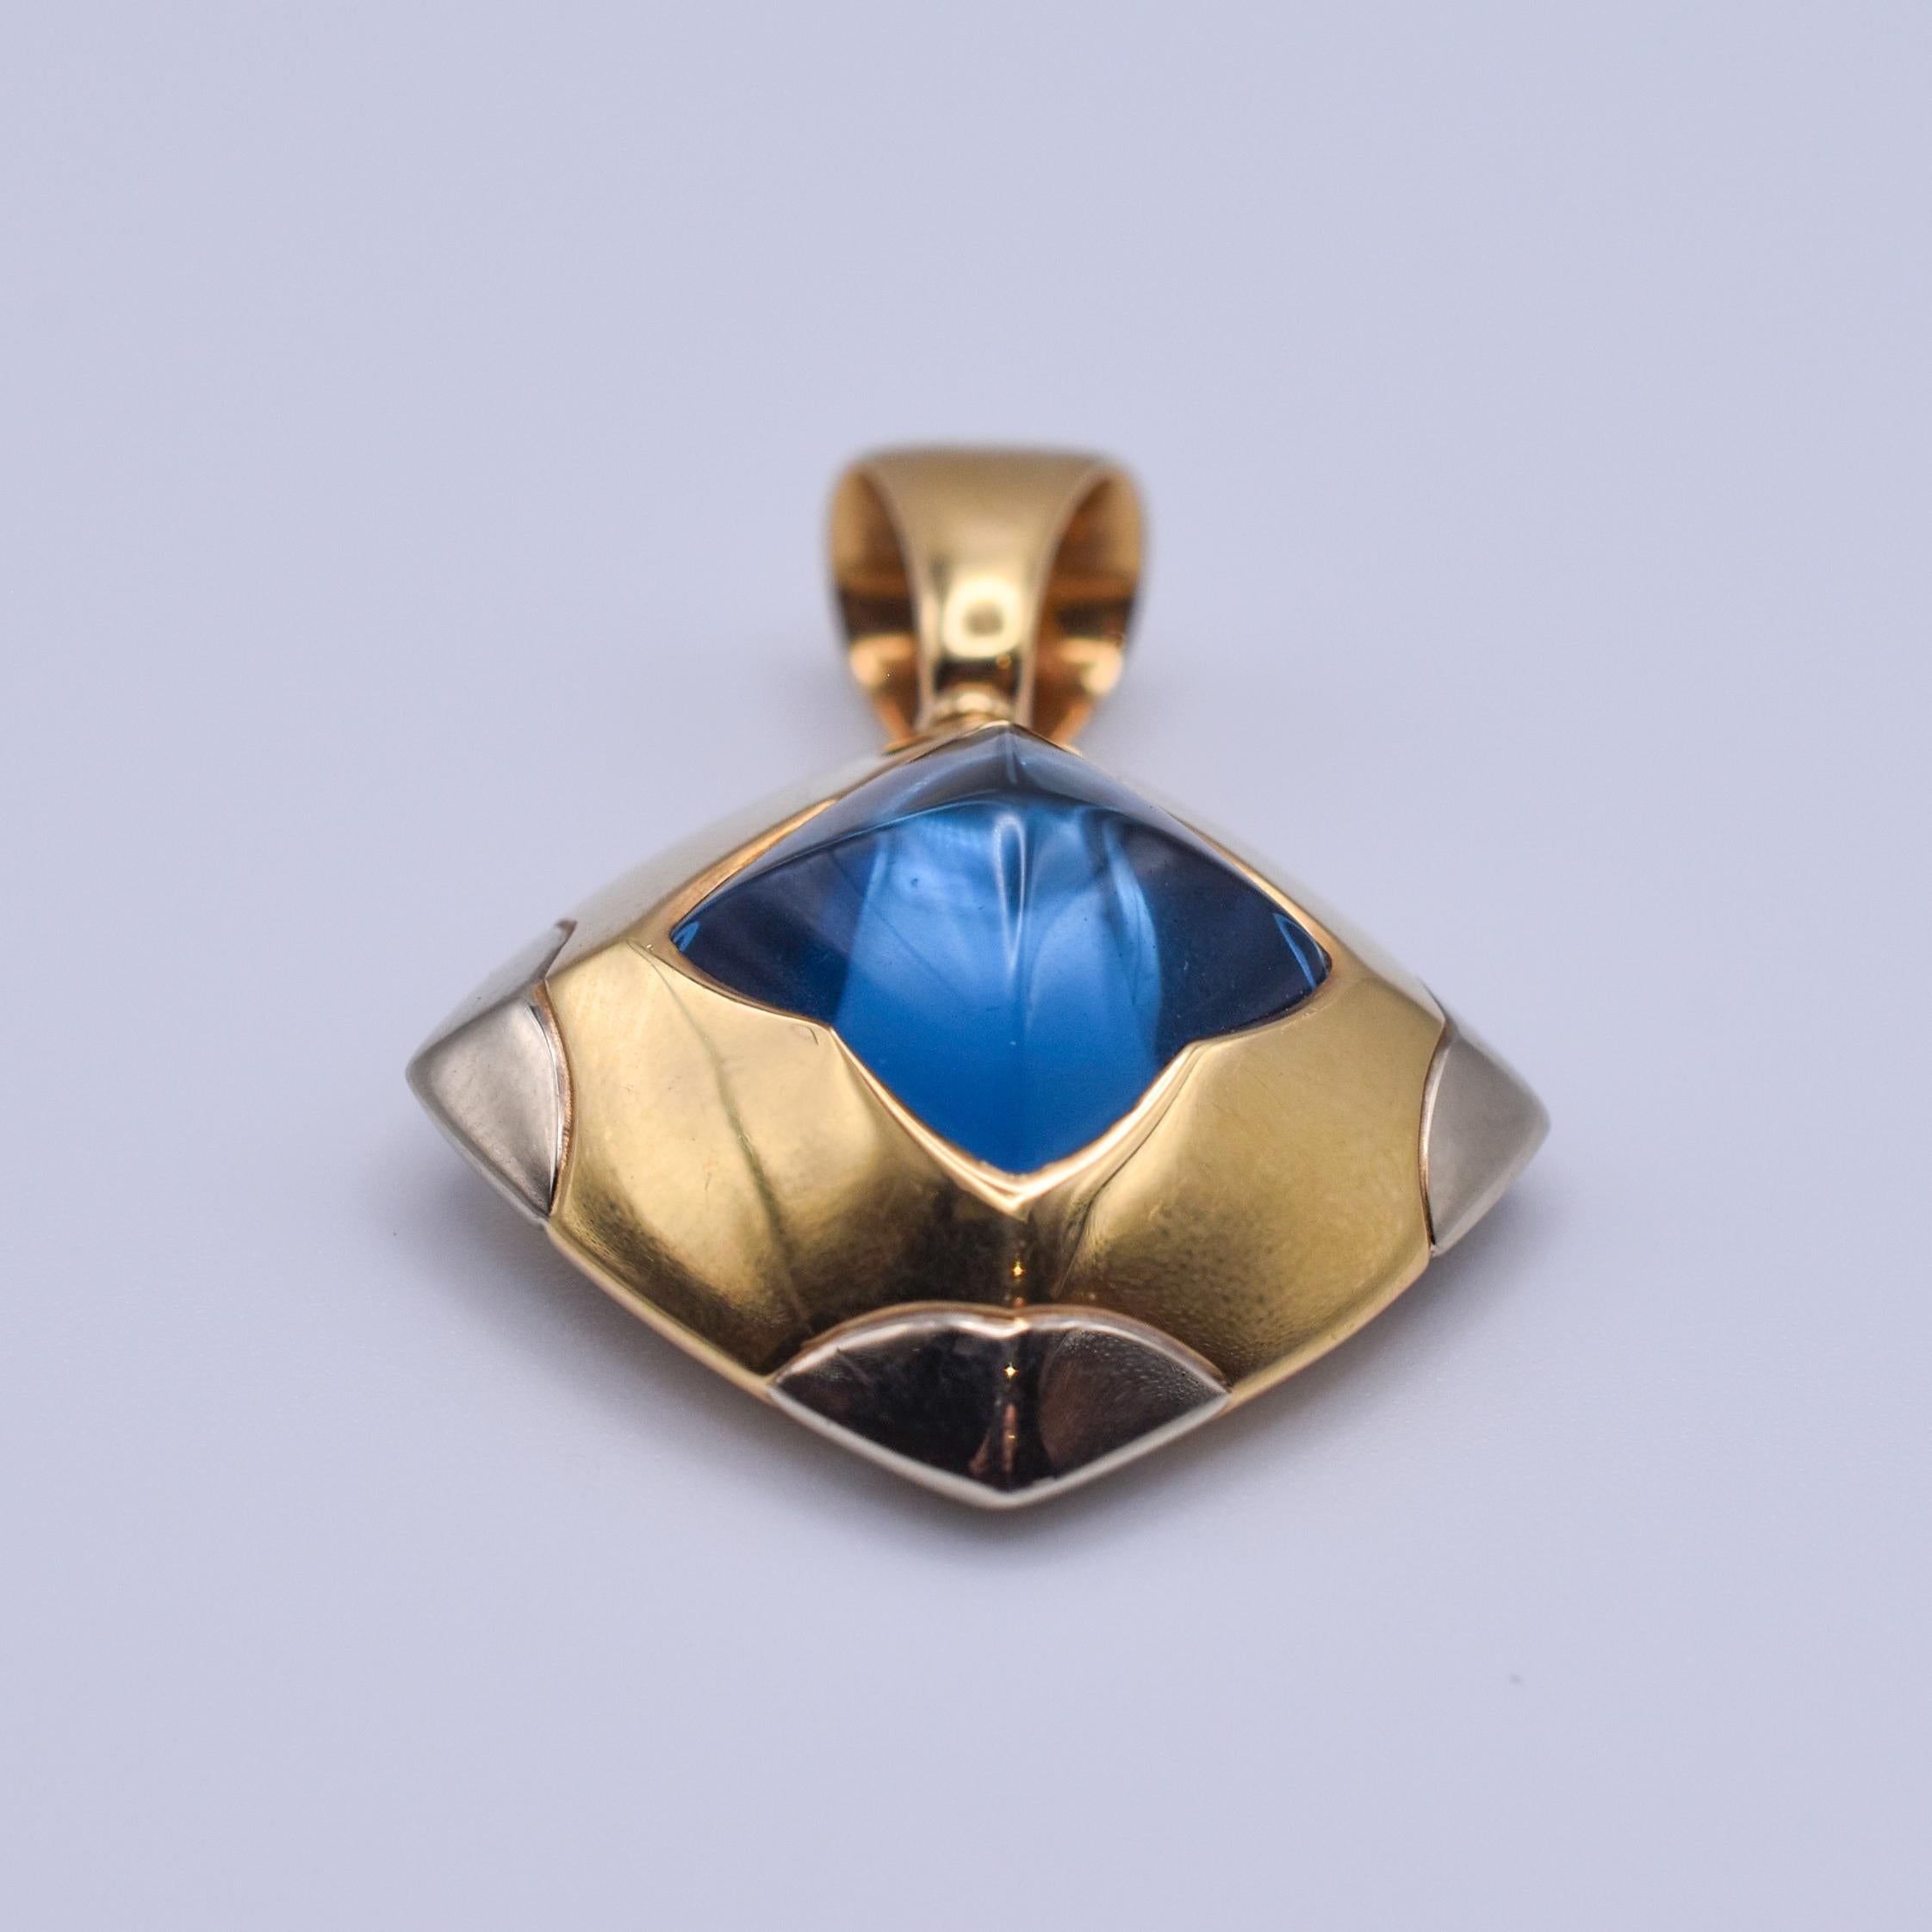 Bulgari 'Pyramid' Topaz Pendant in Two Tone 18k Gold In Excellent Condition For Sale In New York, NY